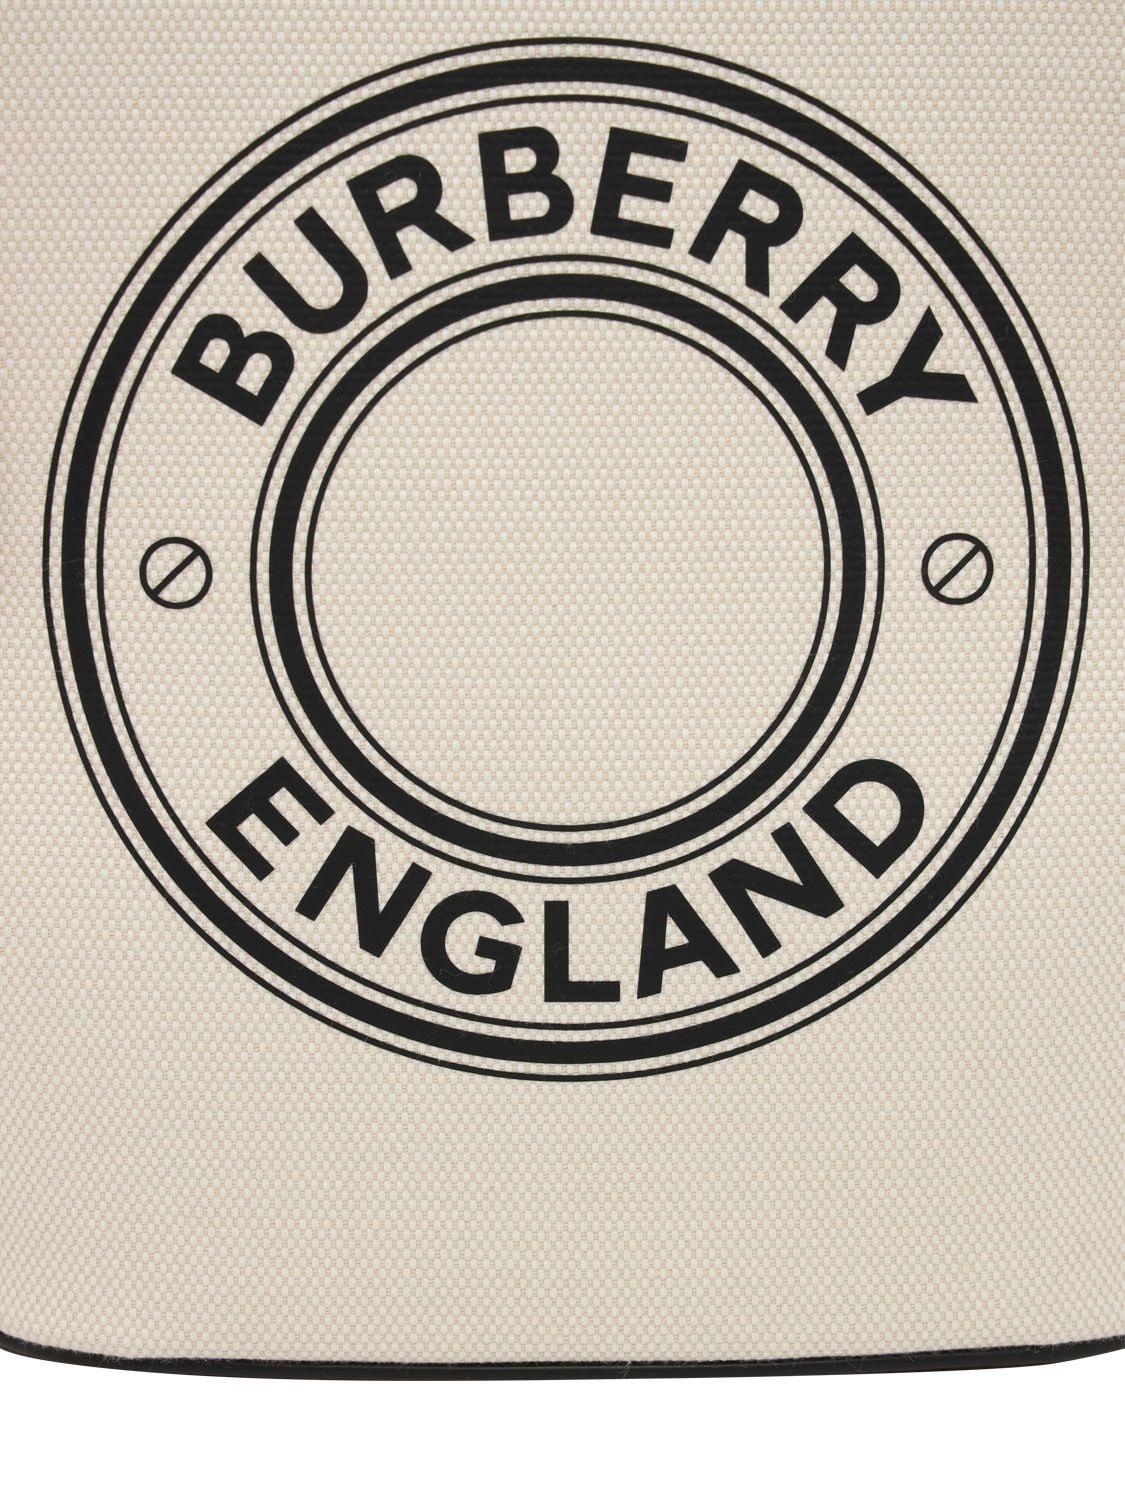 Burberry Small Peggy bucket bag in e-canvas with monogram Price